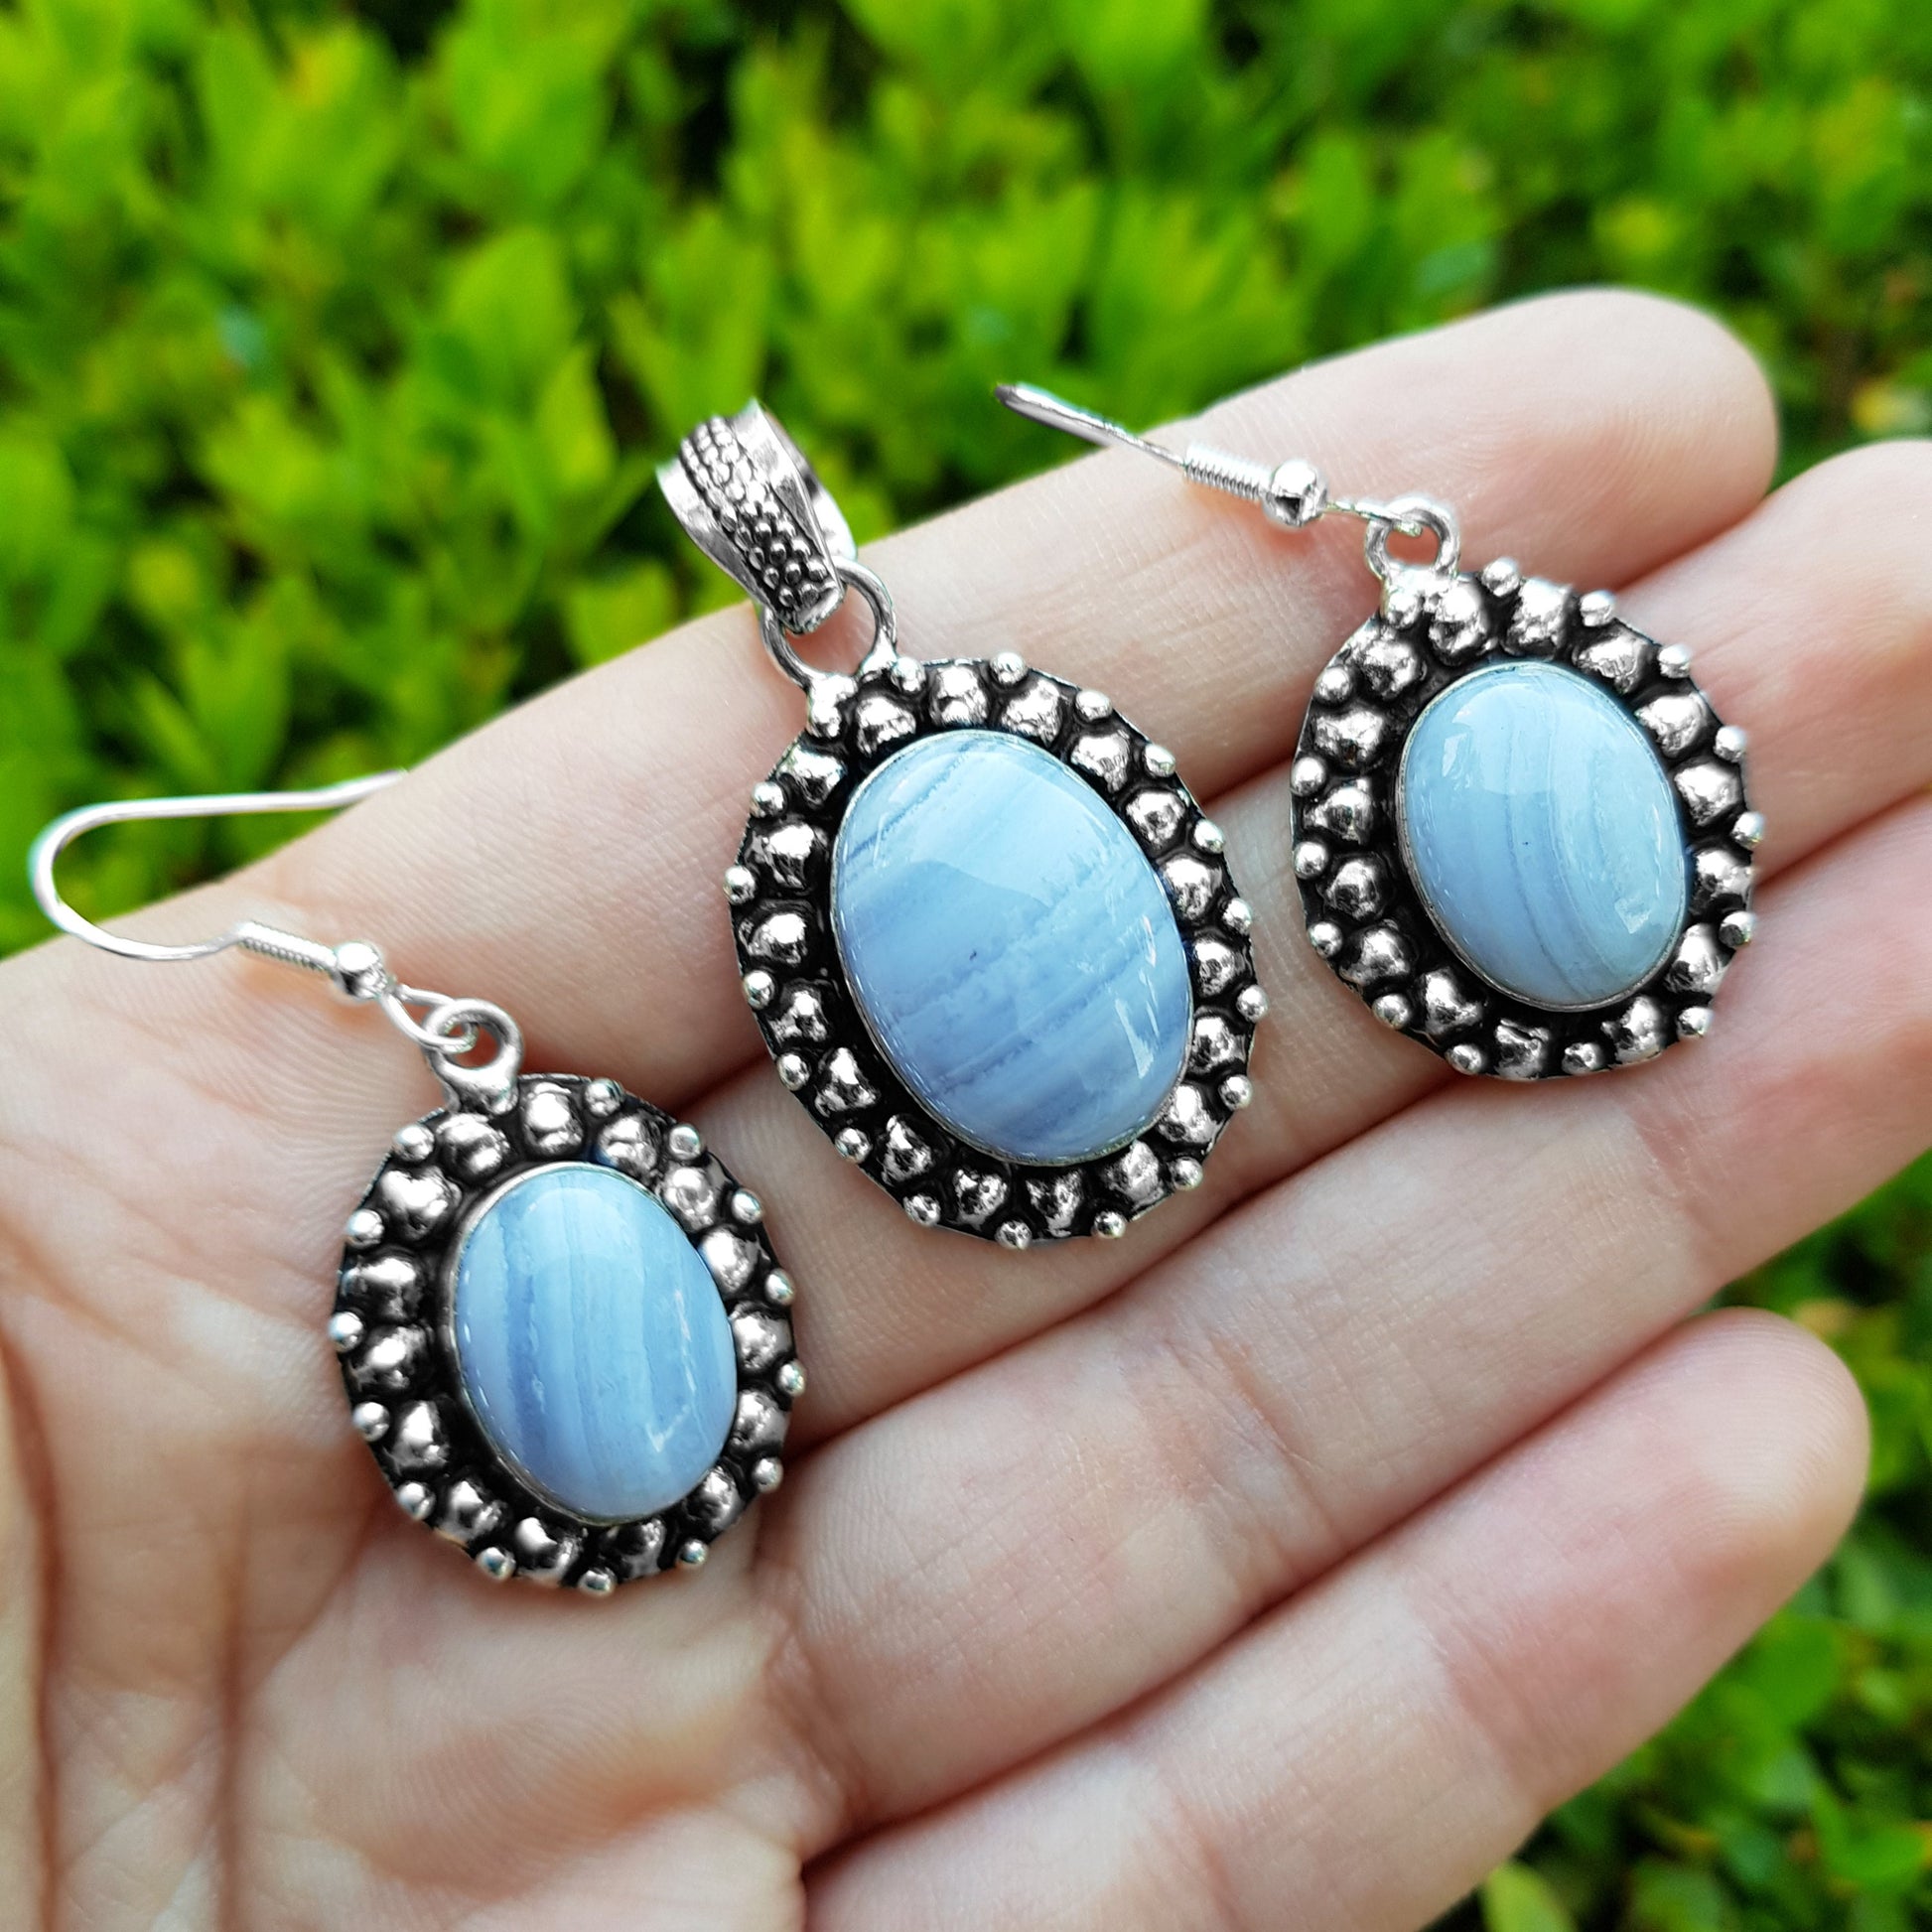 Blue Lace Agate Earrings And Pendant Set Statement Jewellery One Of A Kind Jewellery